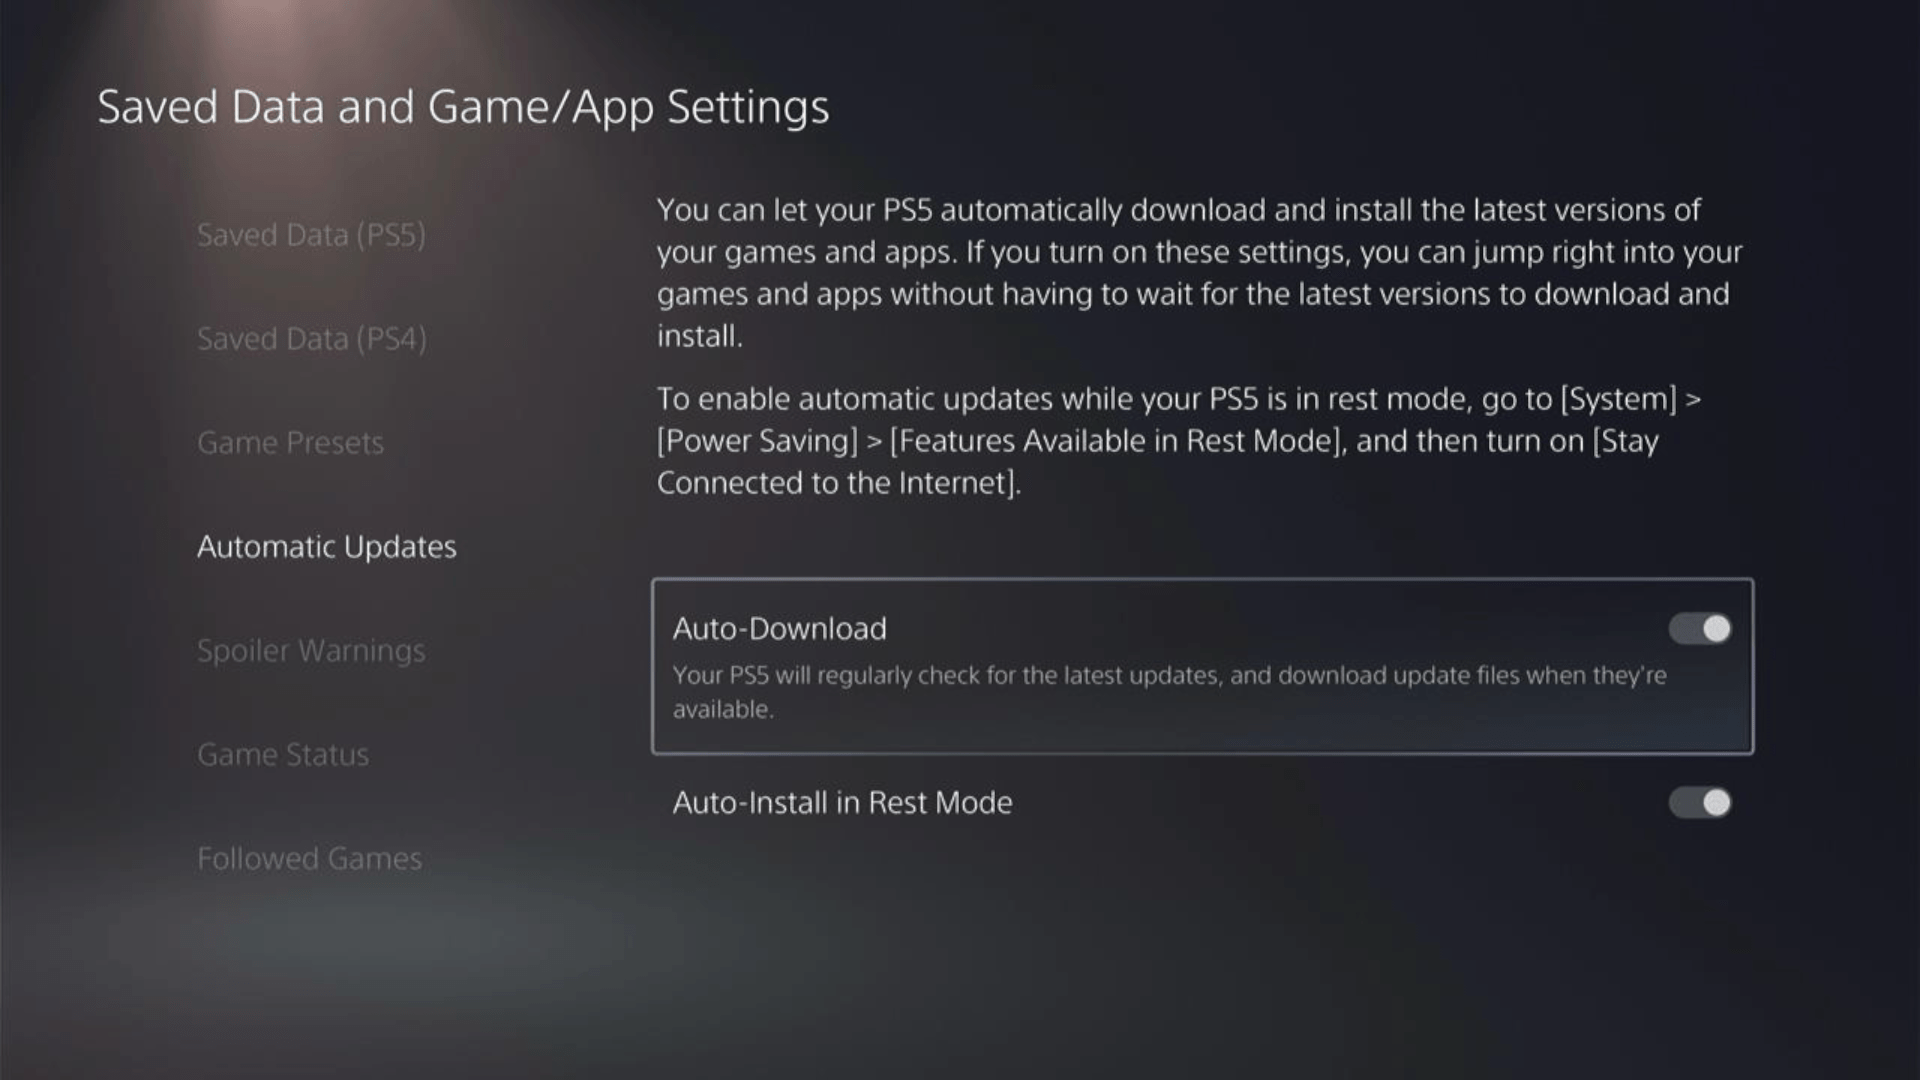 In the Saved Data and Game/App Settings window, select Automatic Updates from the left sidebar to enable automatic game updates to avoid stuttering